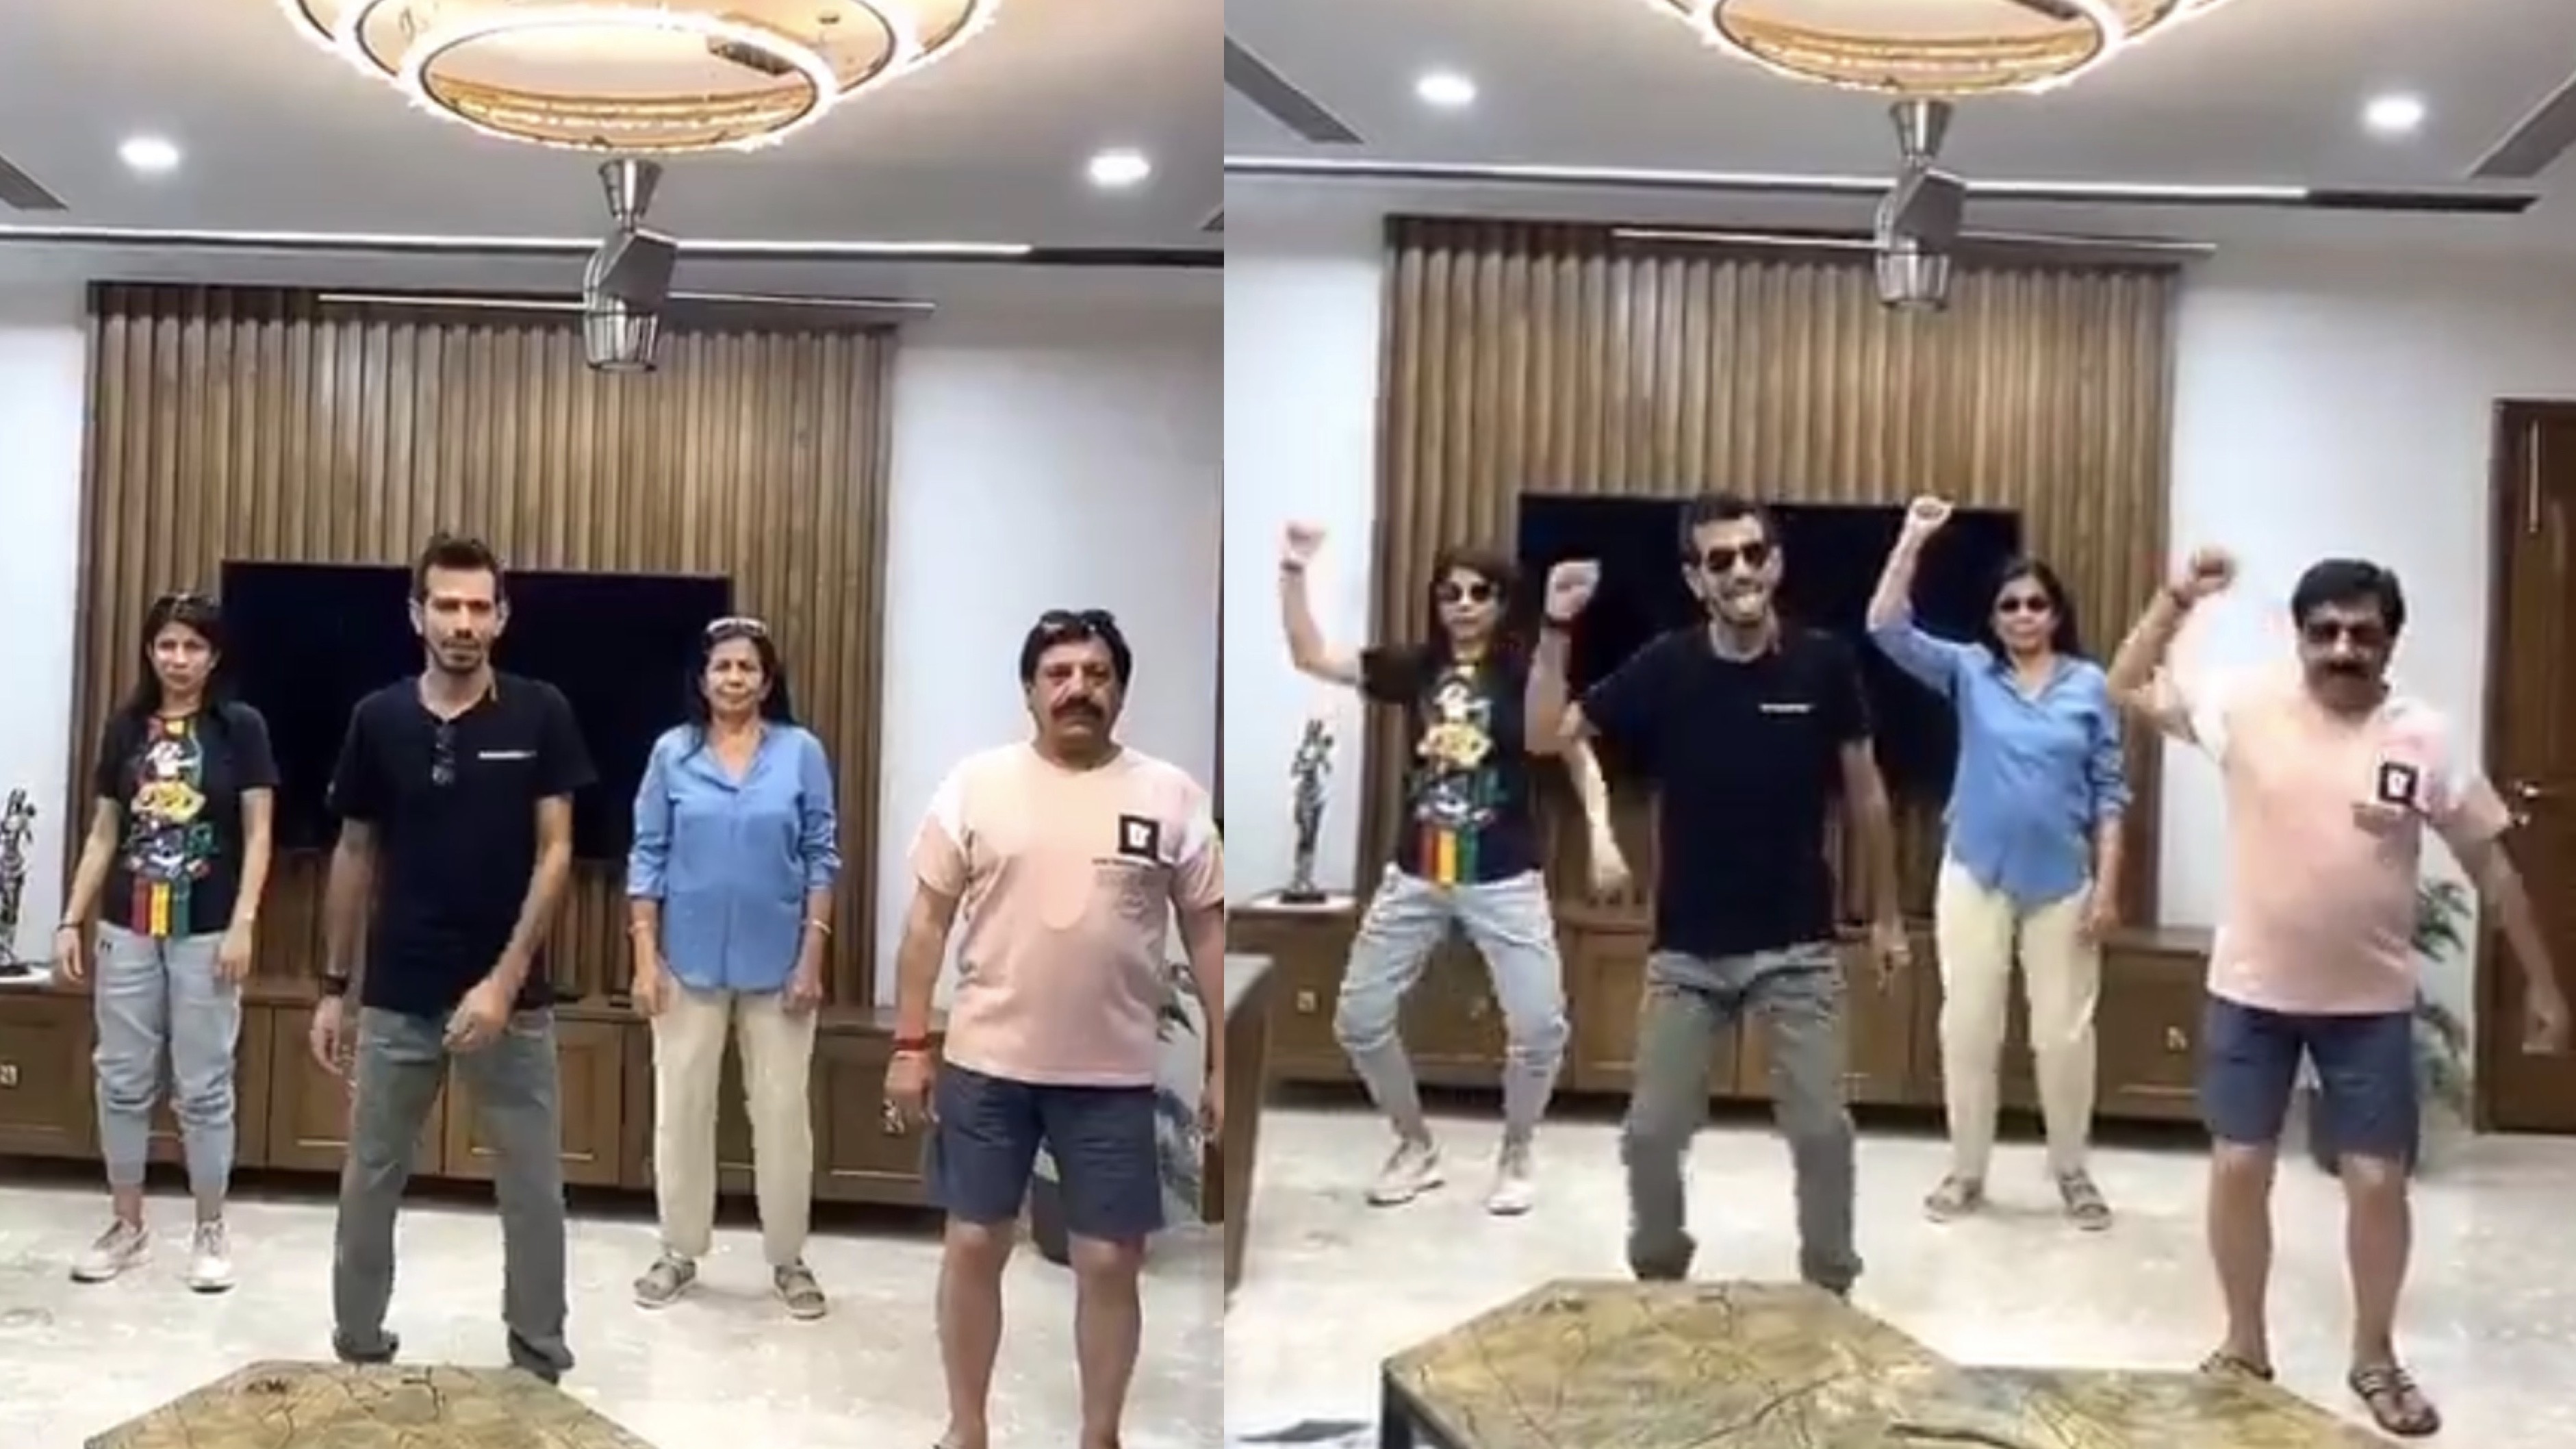 WATCH- Yuzvendra Chahal slays dance moves with his family amid the COVID-19 lockdown